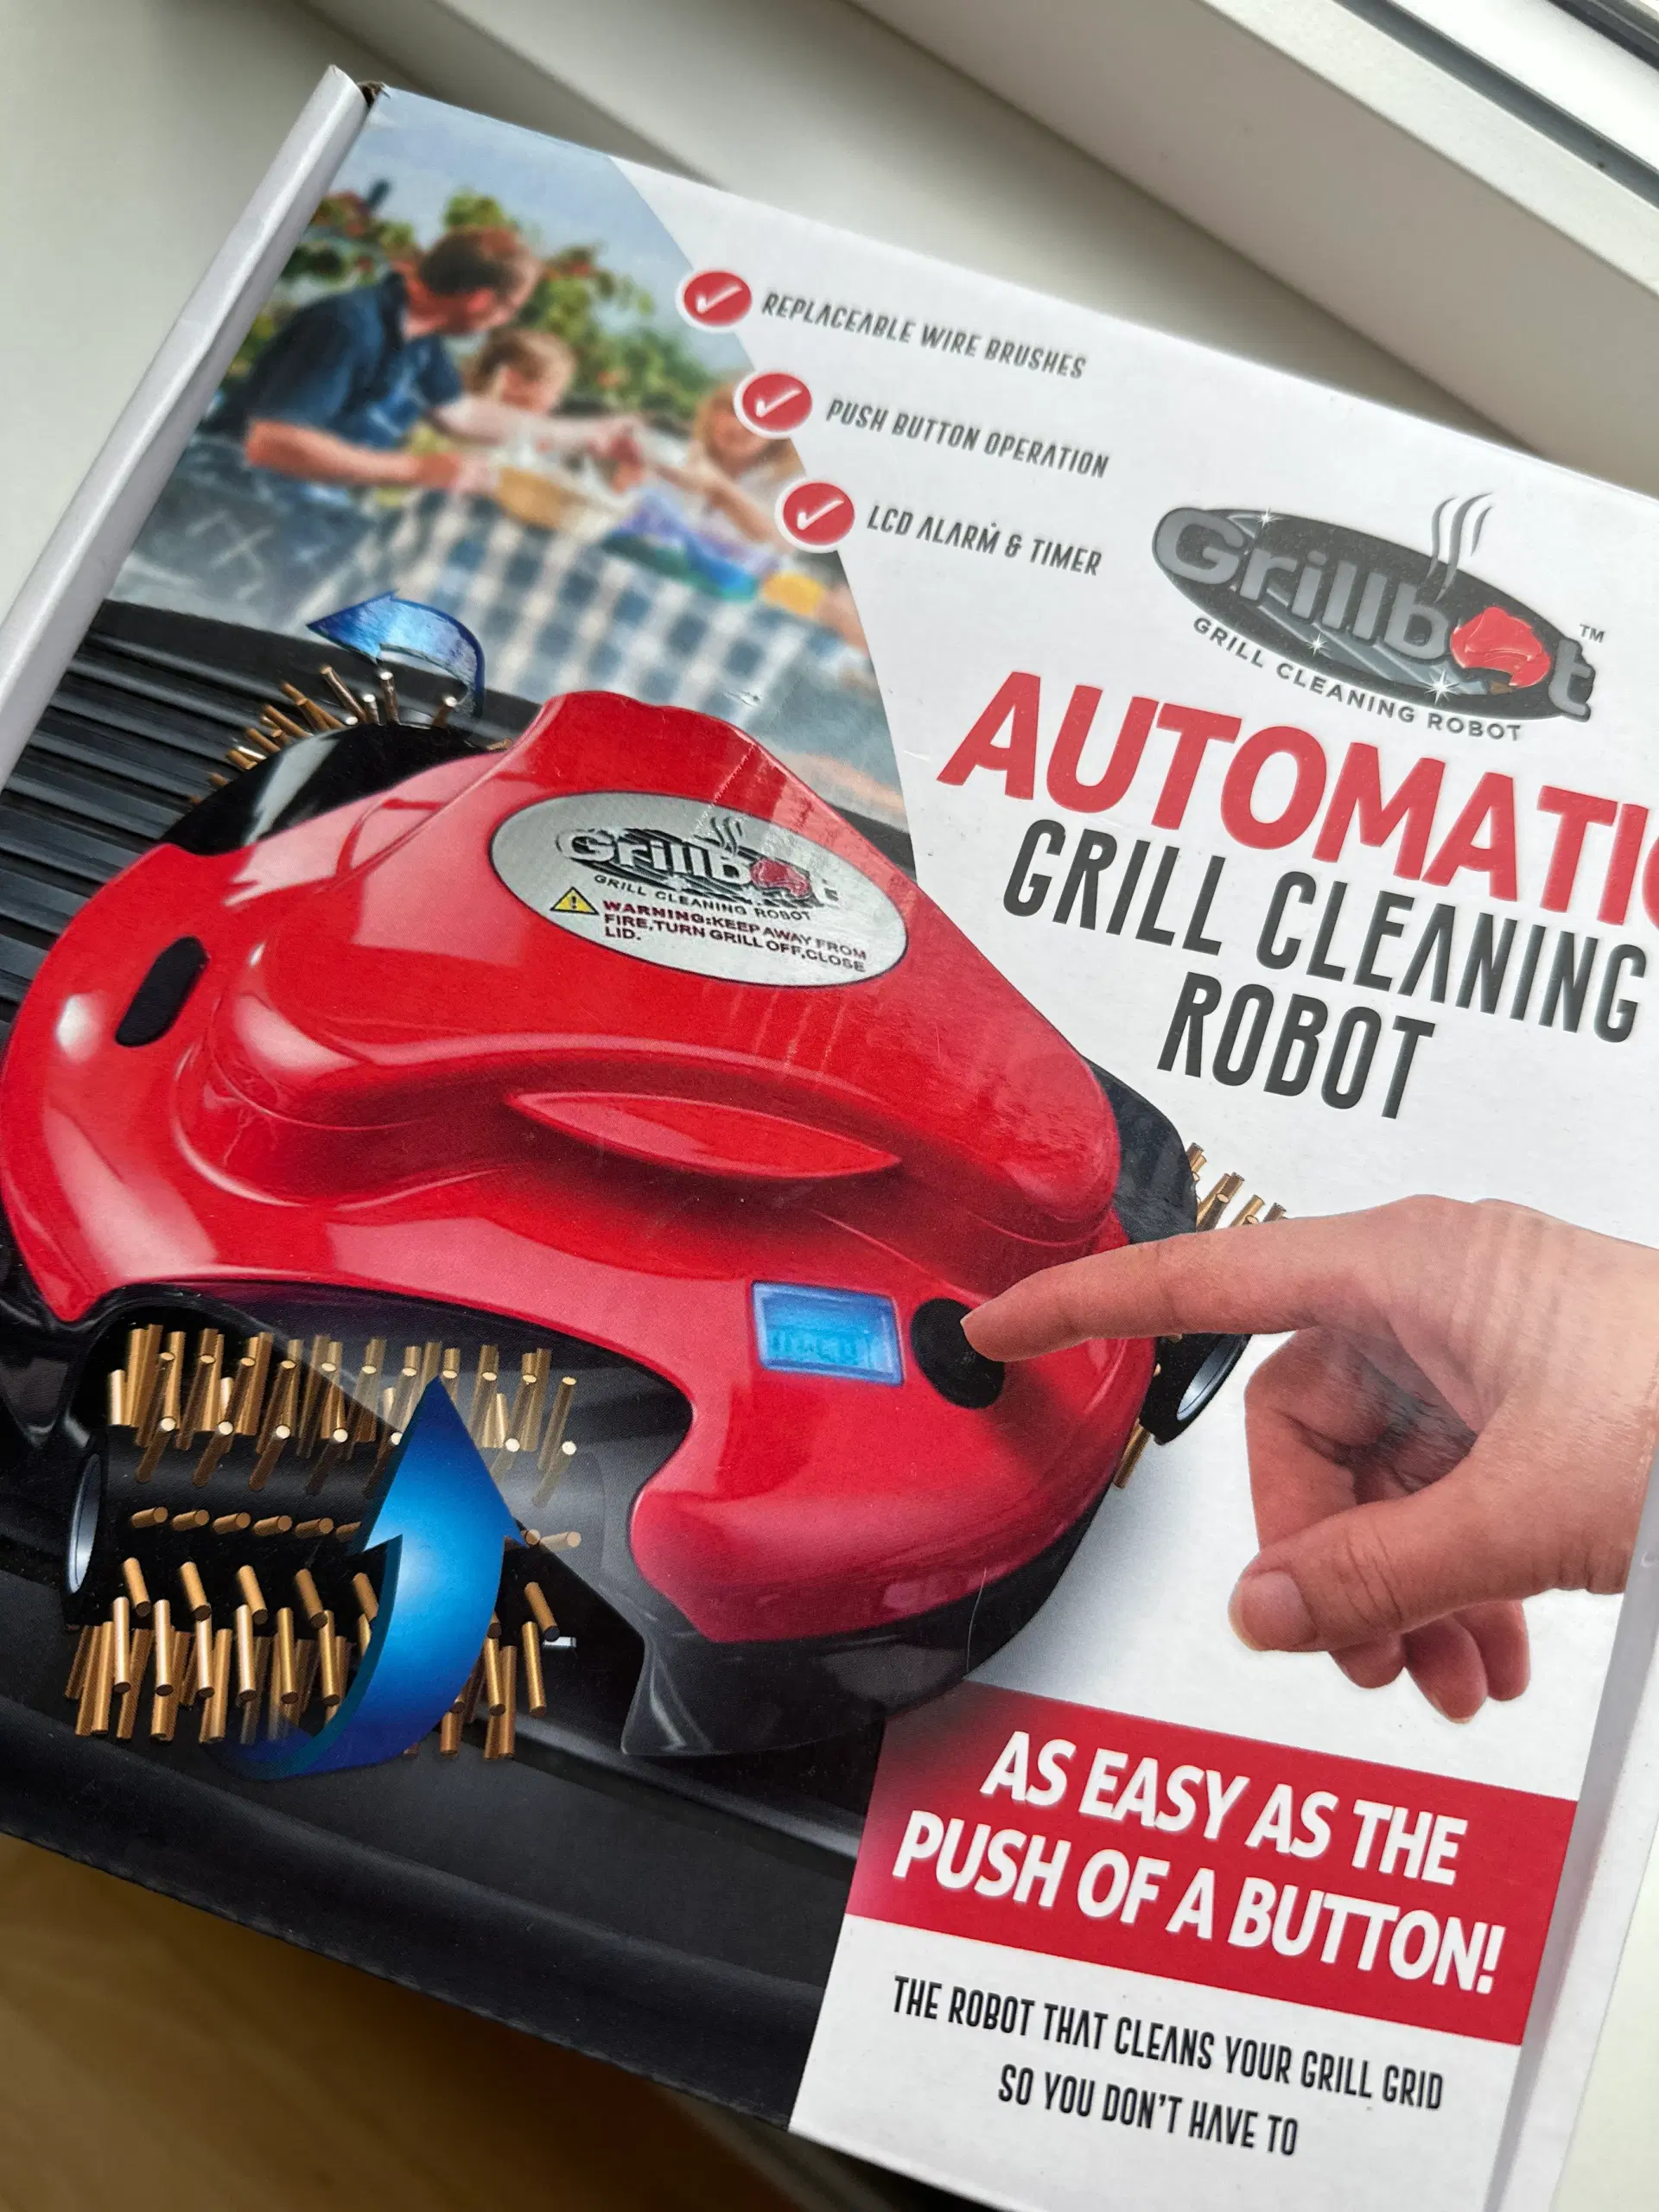 Grillbot Automatic Grill Cleaning Robot - AliExpress